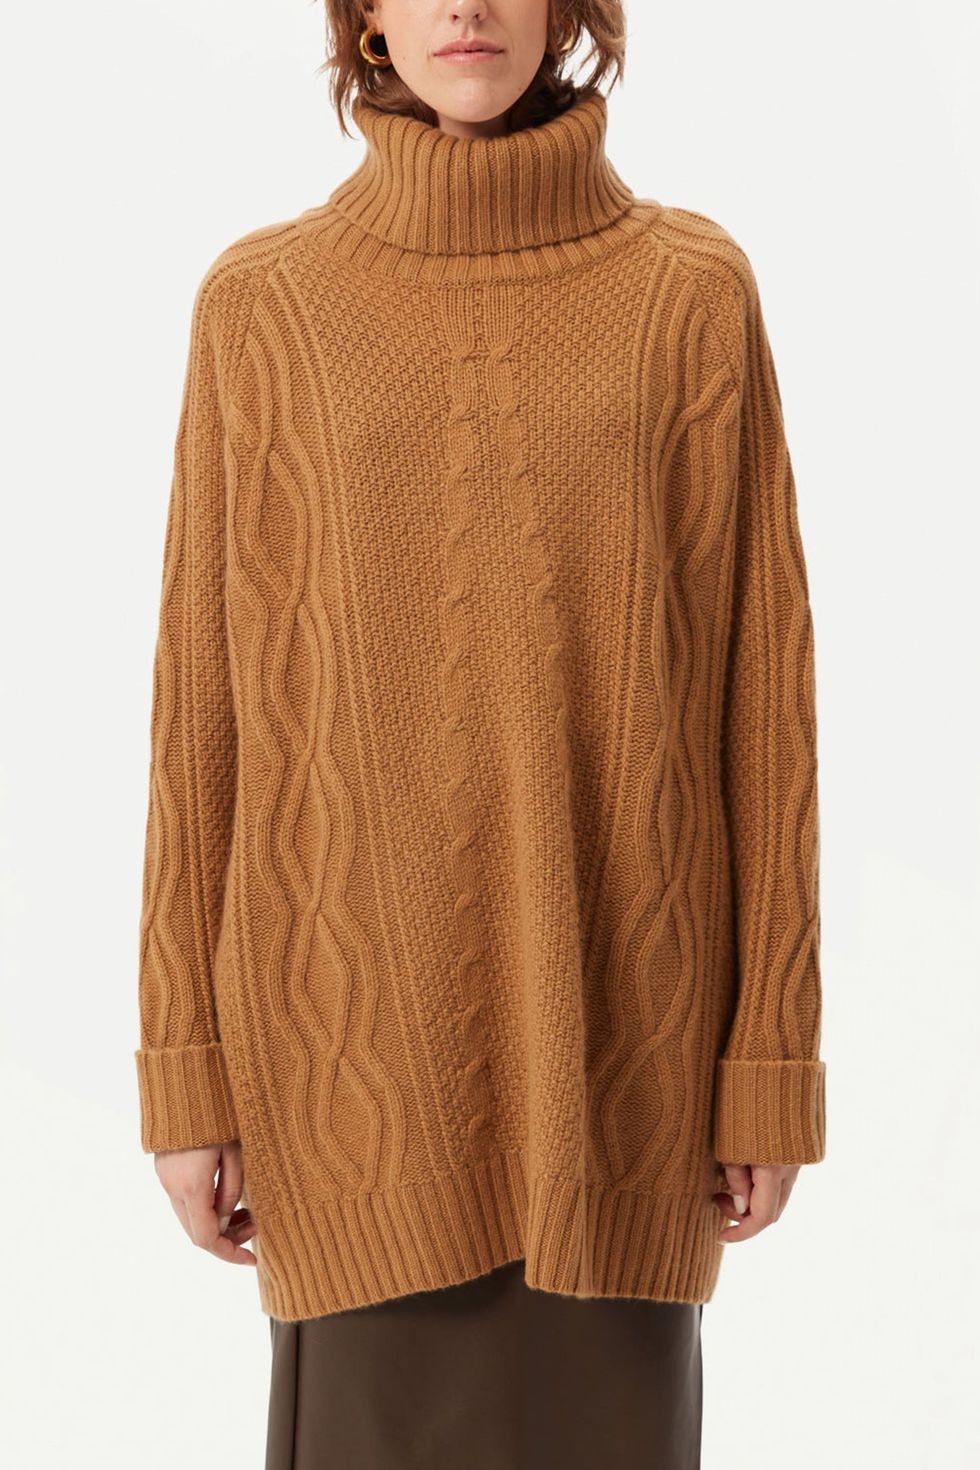 10 Comfy and Cozy Sweaters you need in your Wardrobe